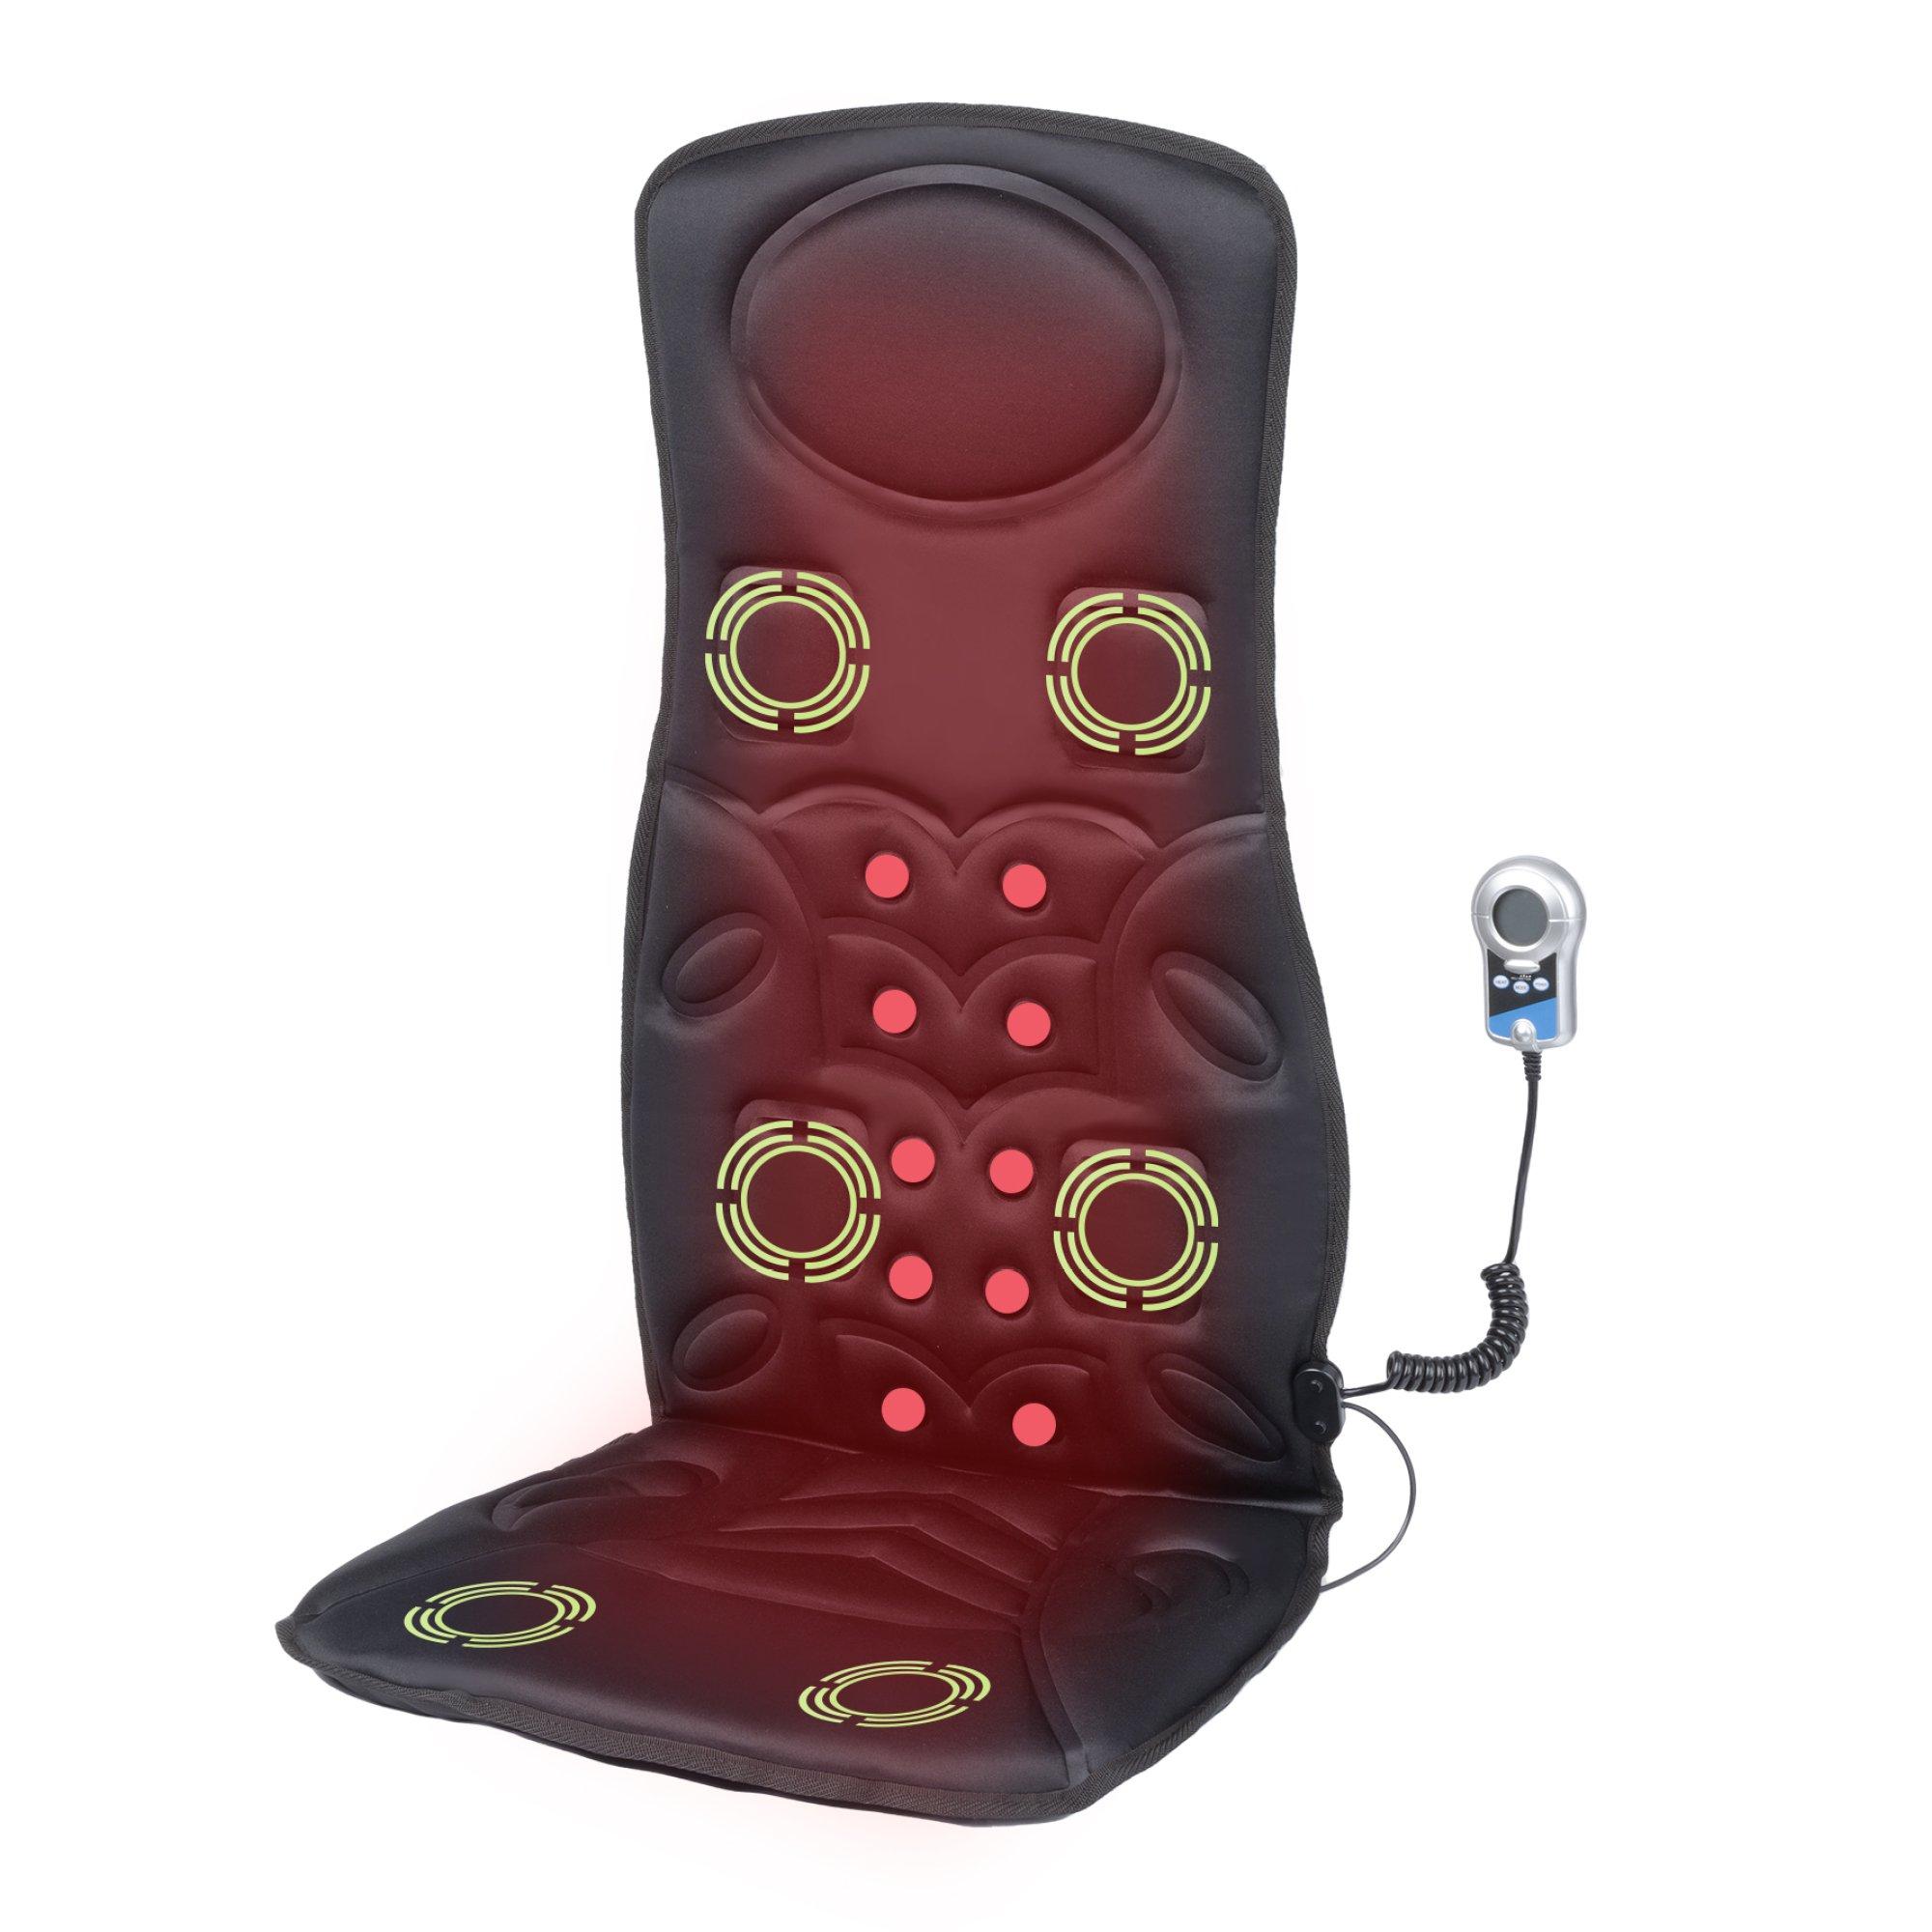 Deluxe Heated Car Back Massager with Remote